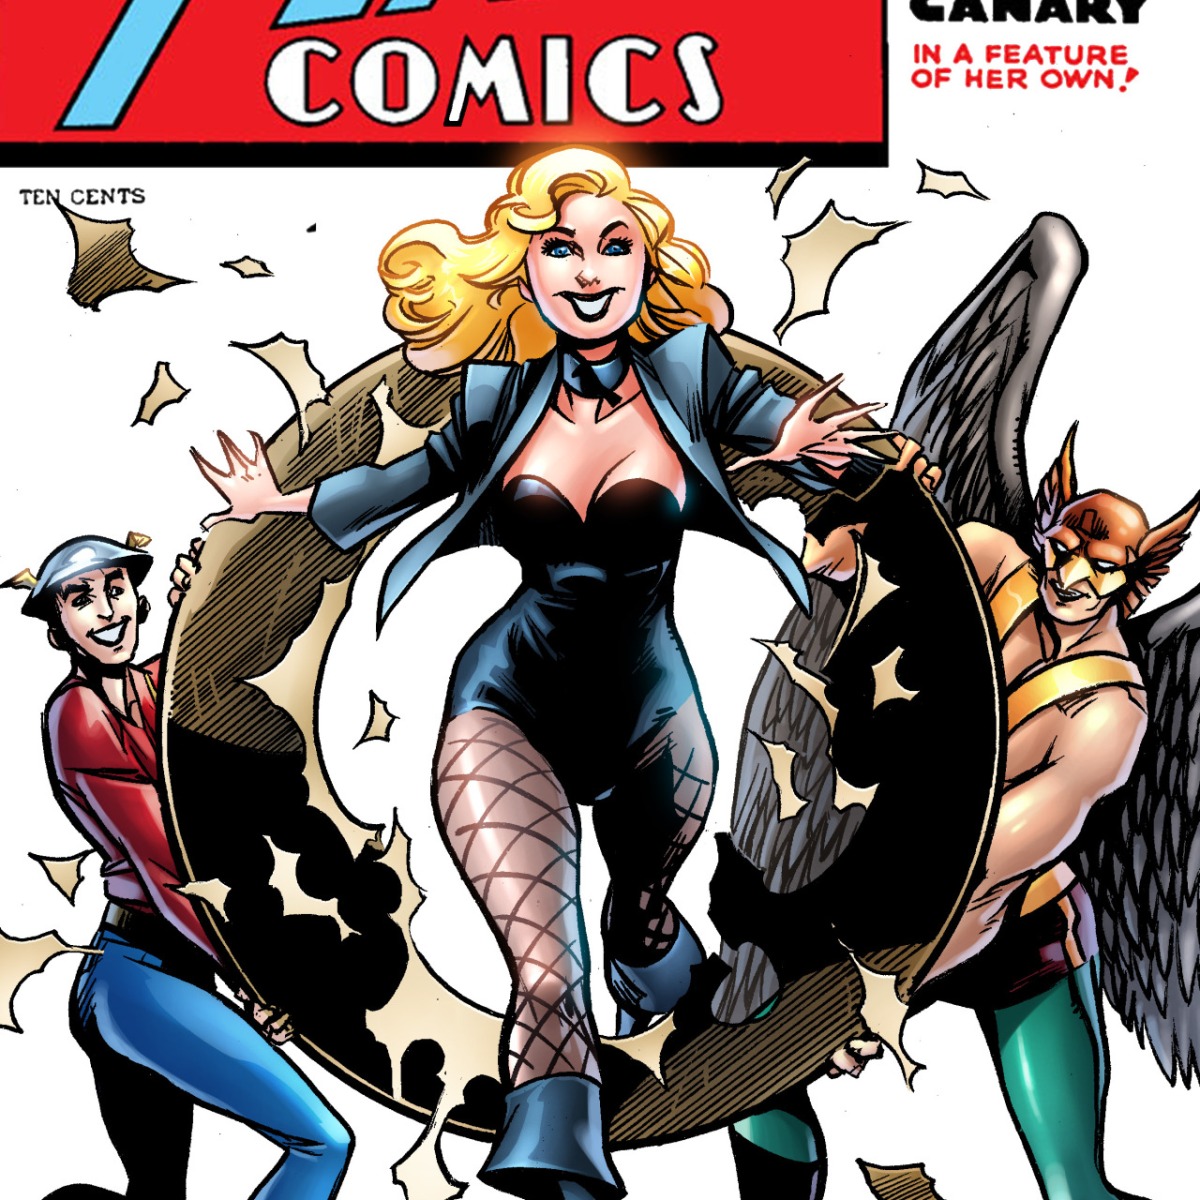 Black Canary anniversary – Comic cover remake